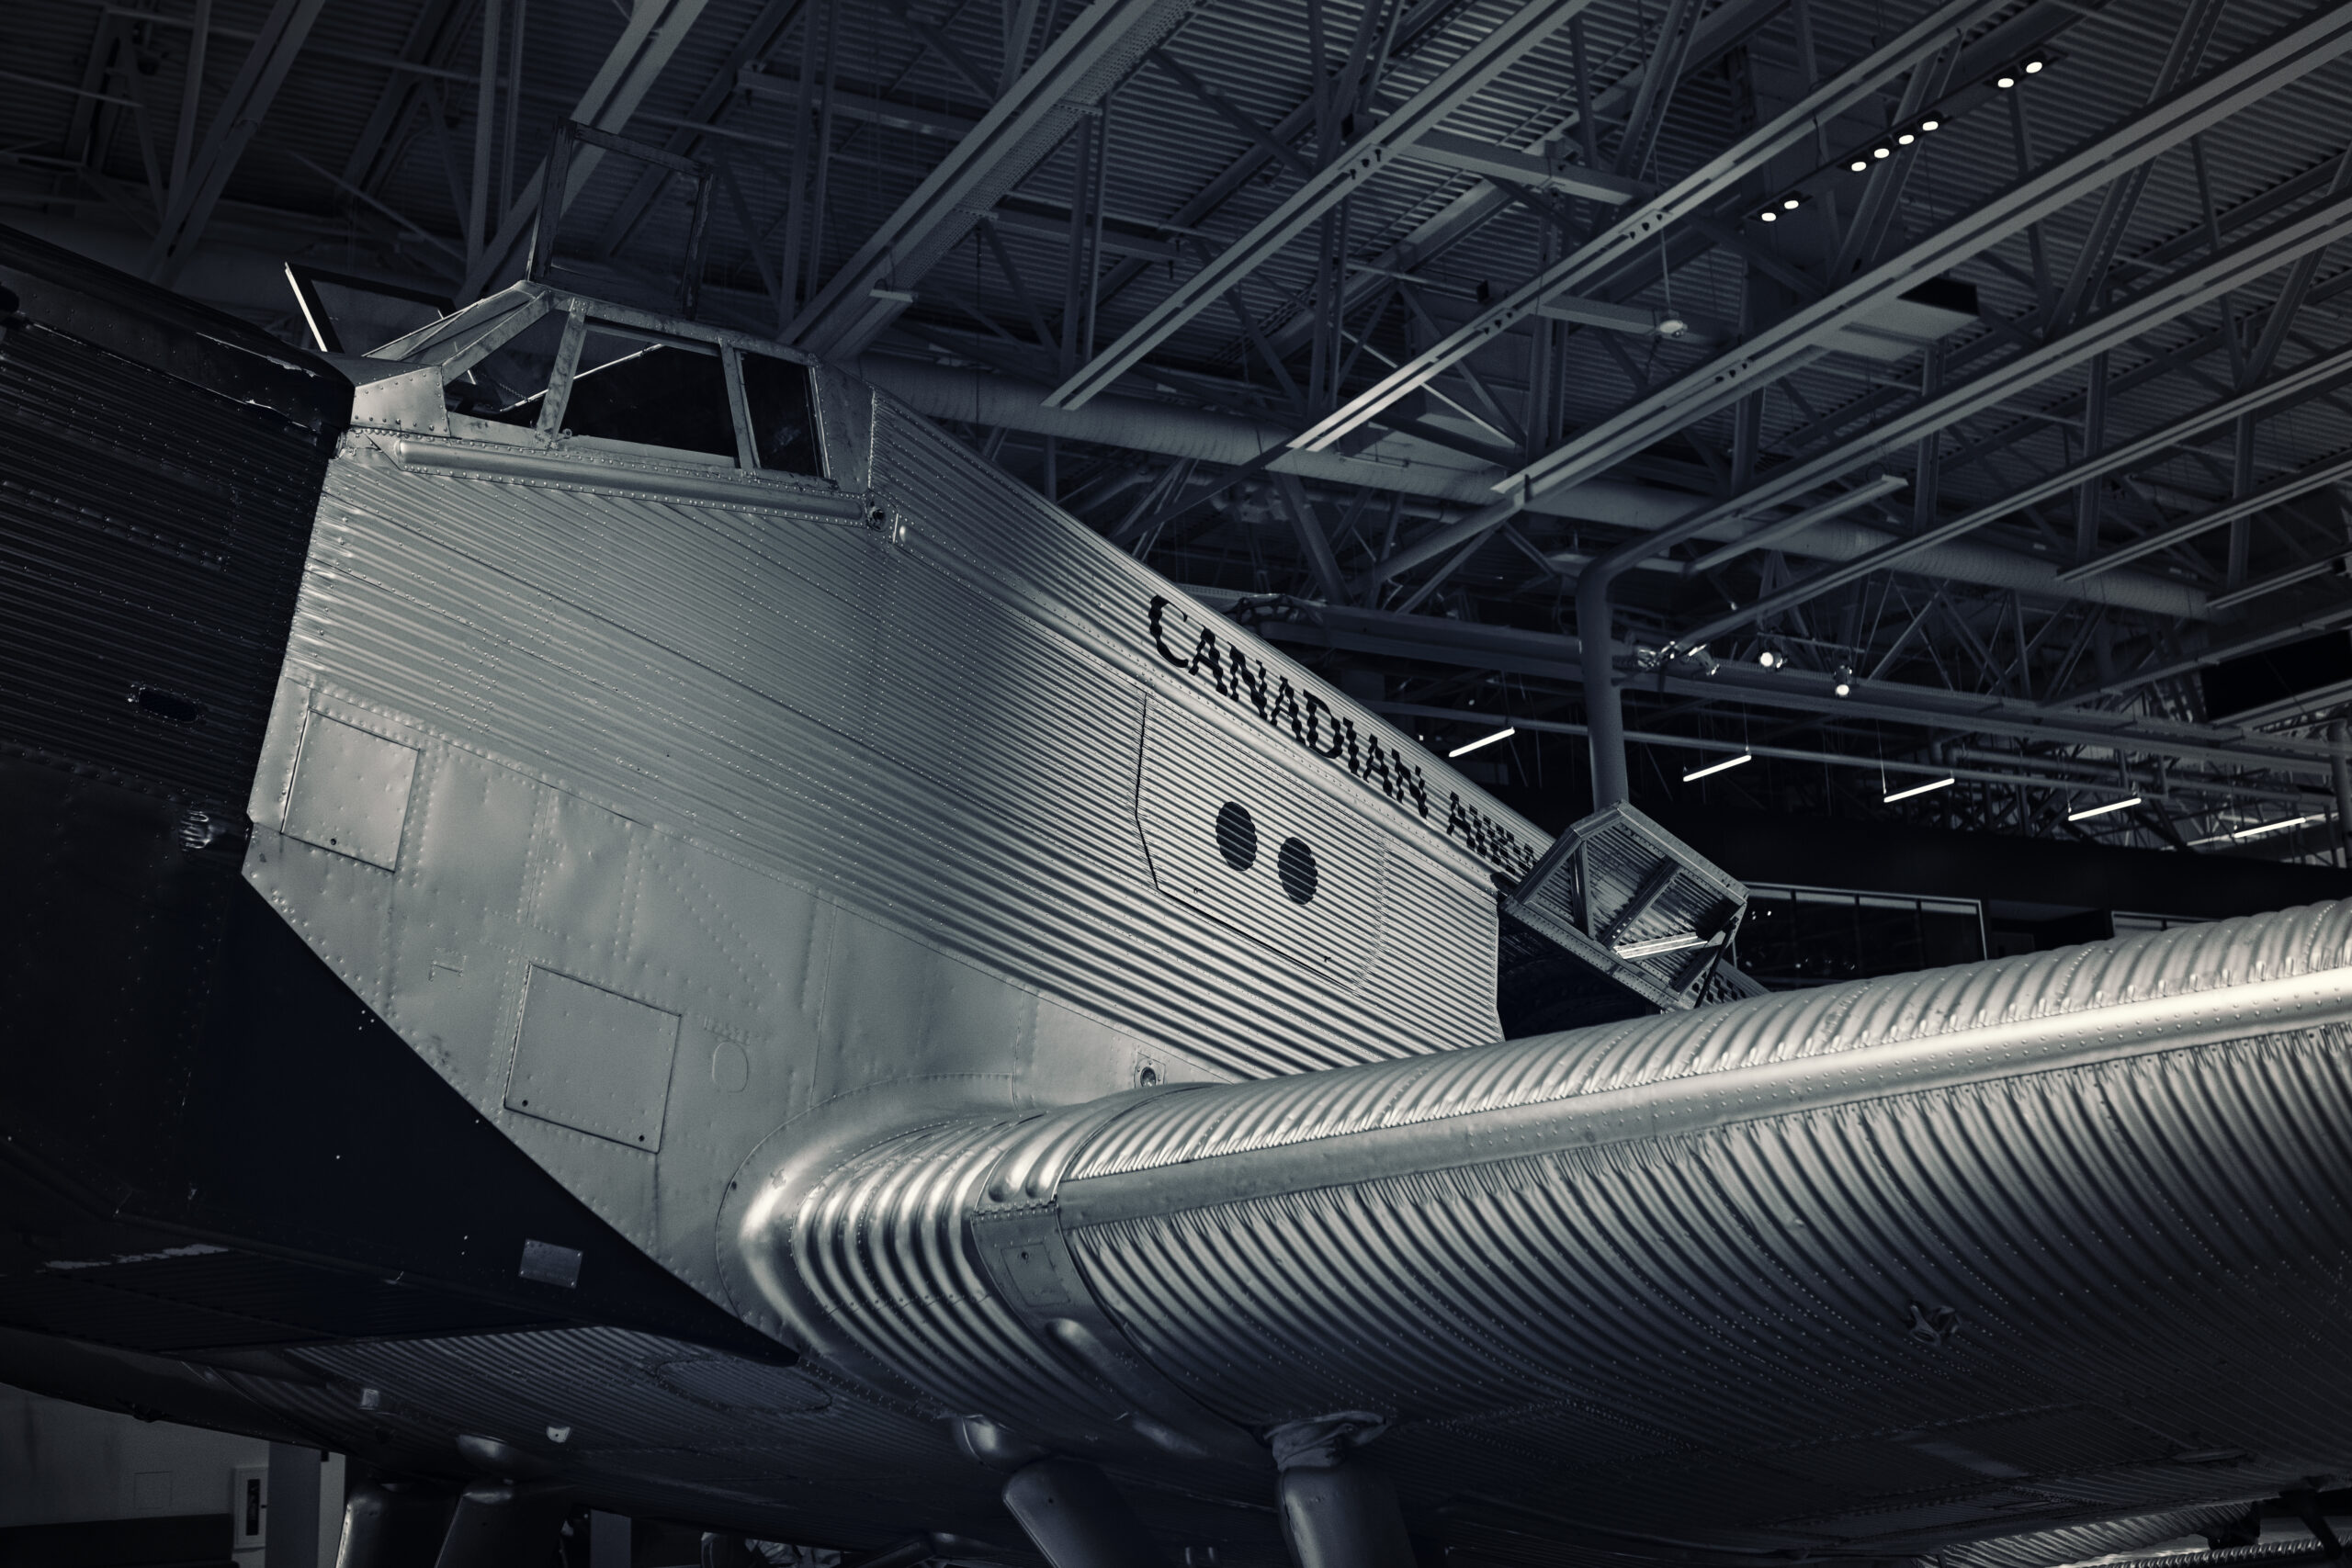 Close-up, black and white image of a large antique cargo plane parked inside a hangar.